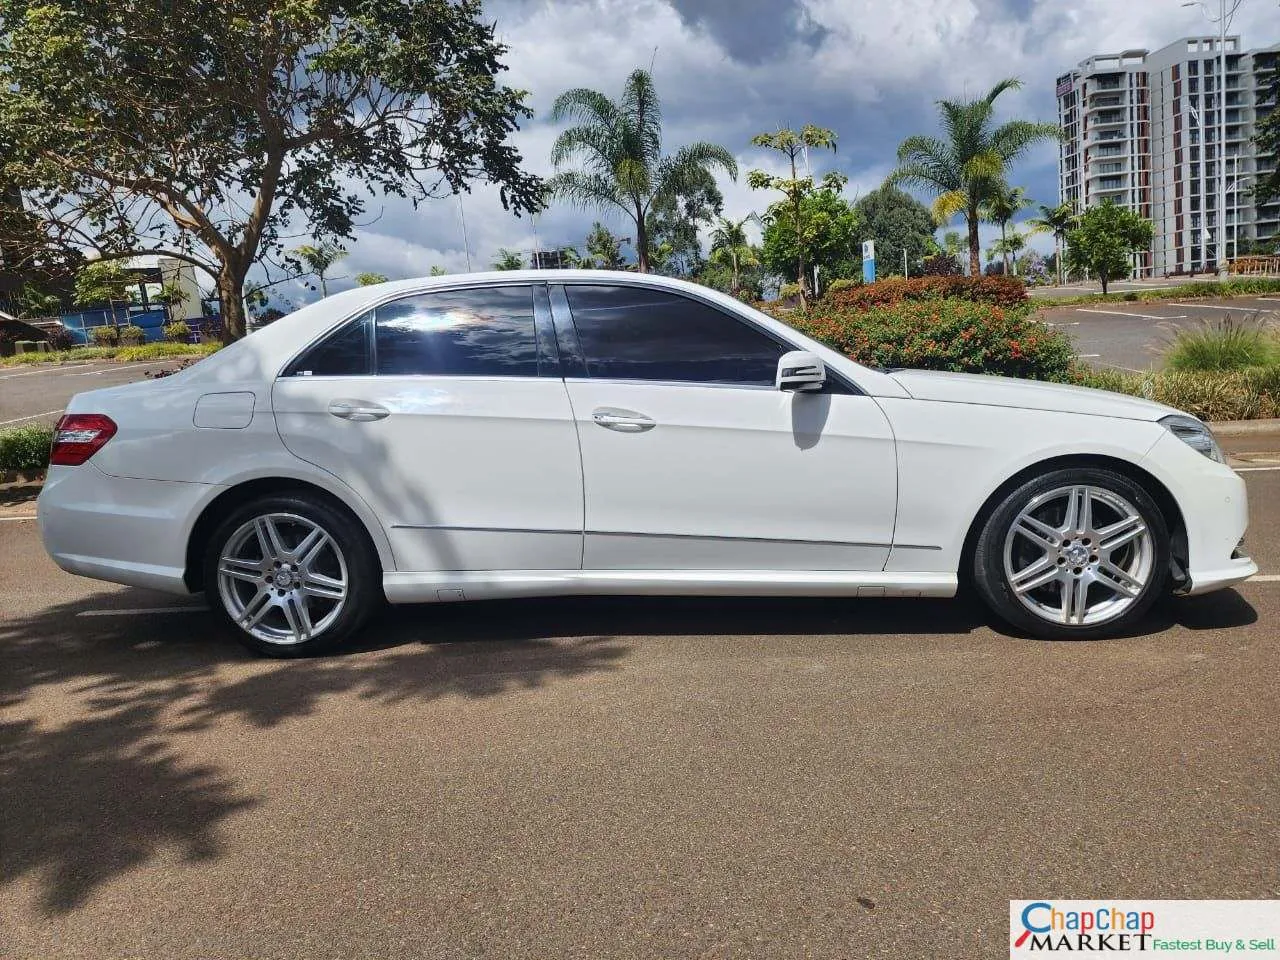 Cars Cars For Sale-Mercedes Benz E250 kenya Cheapest You Pay 30% DEPOSIT Trade in OK e250 for sale in kenya hire purchase 9